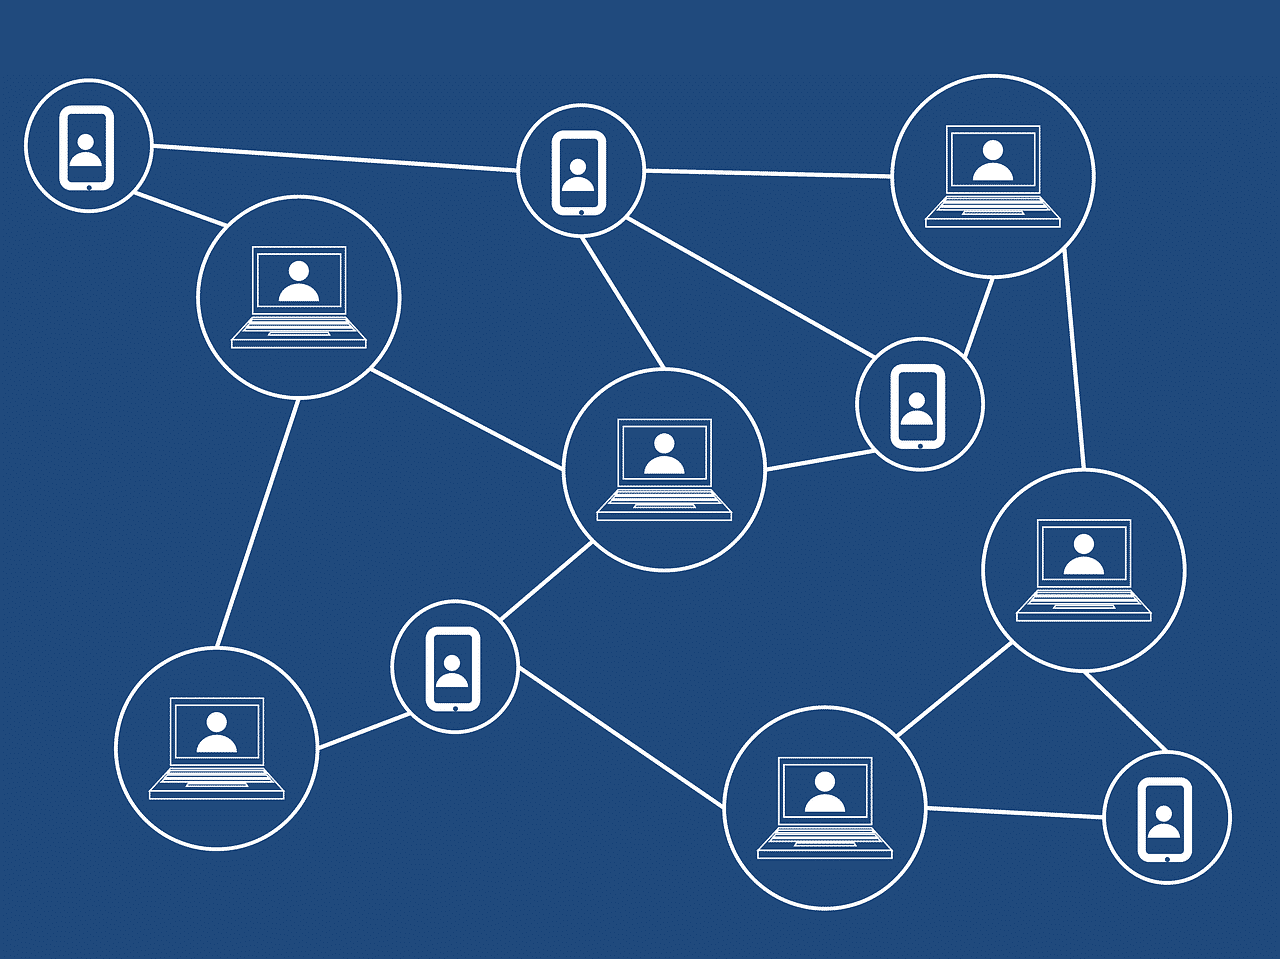 Illustration of a network of computers to represent a blockchain network.